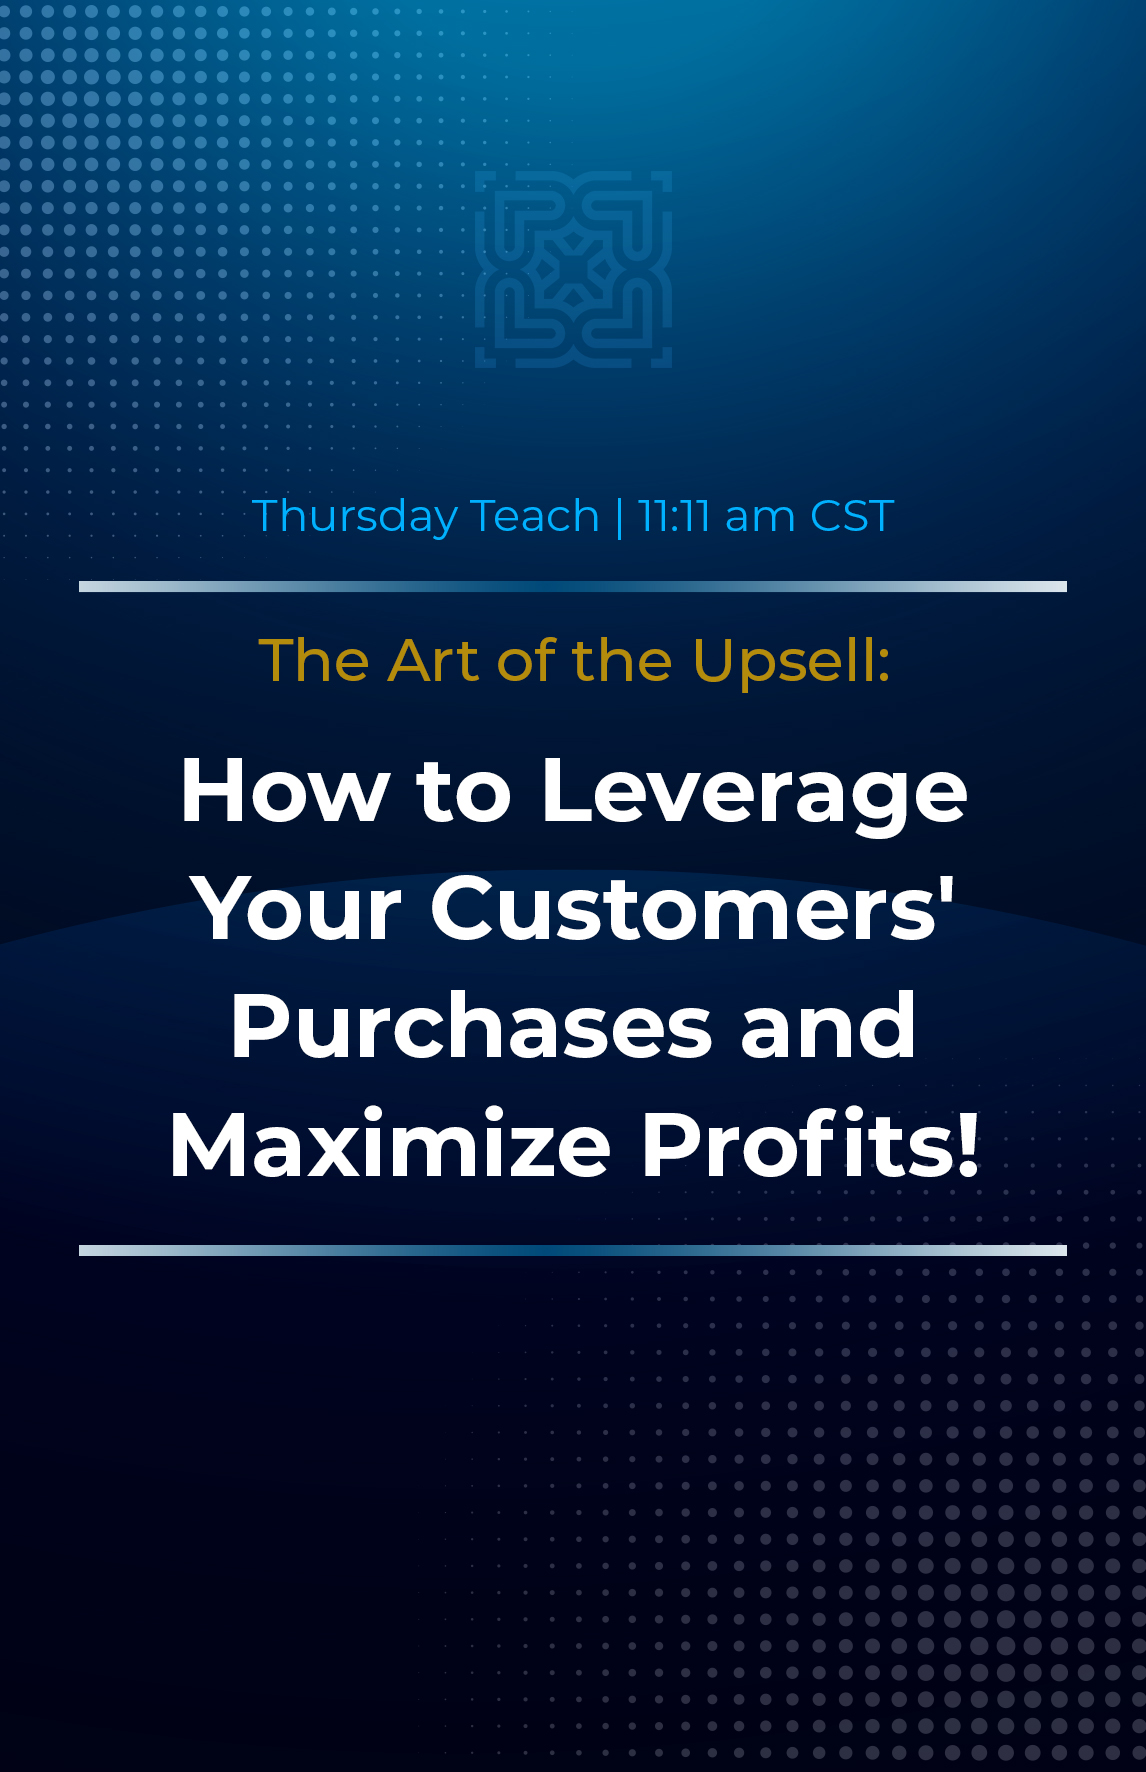 How to Leverage Your Customers Purchases and Maximize Profits